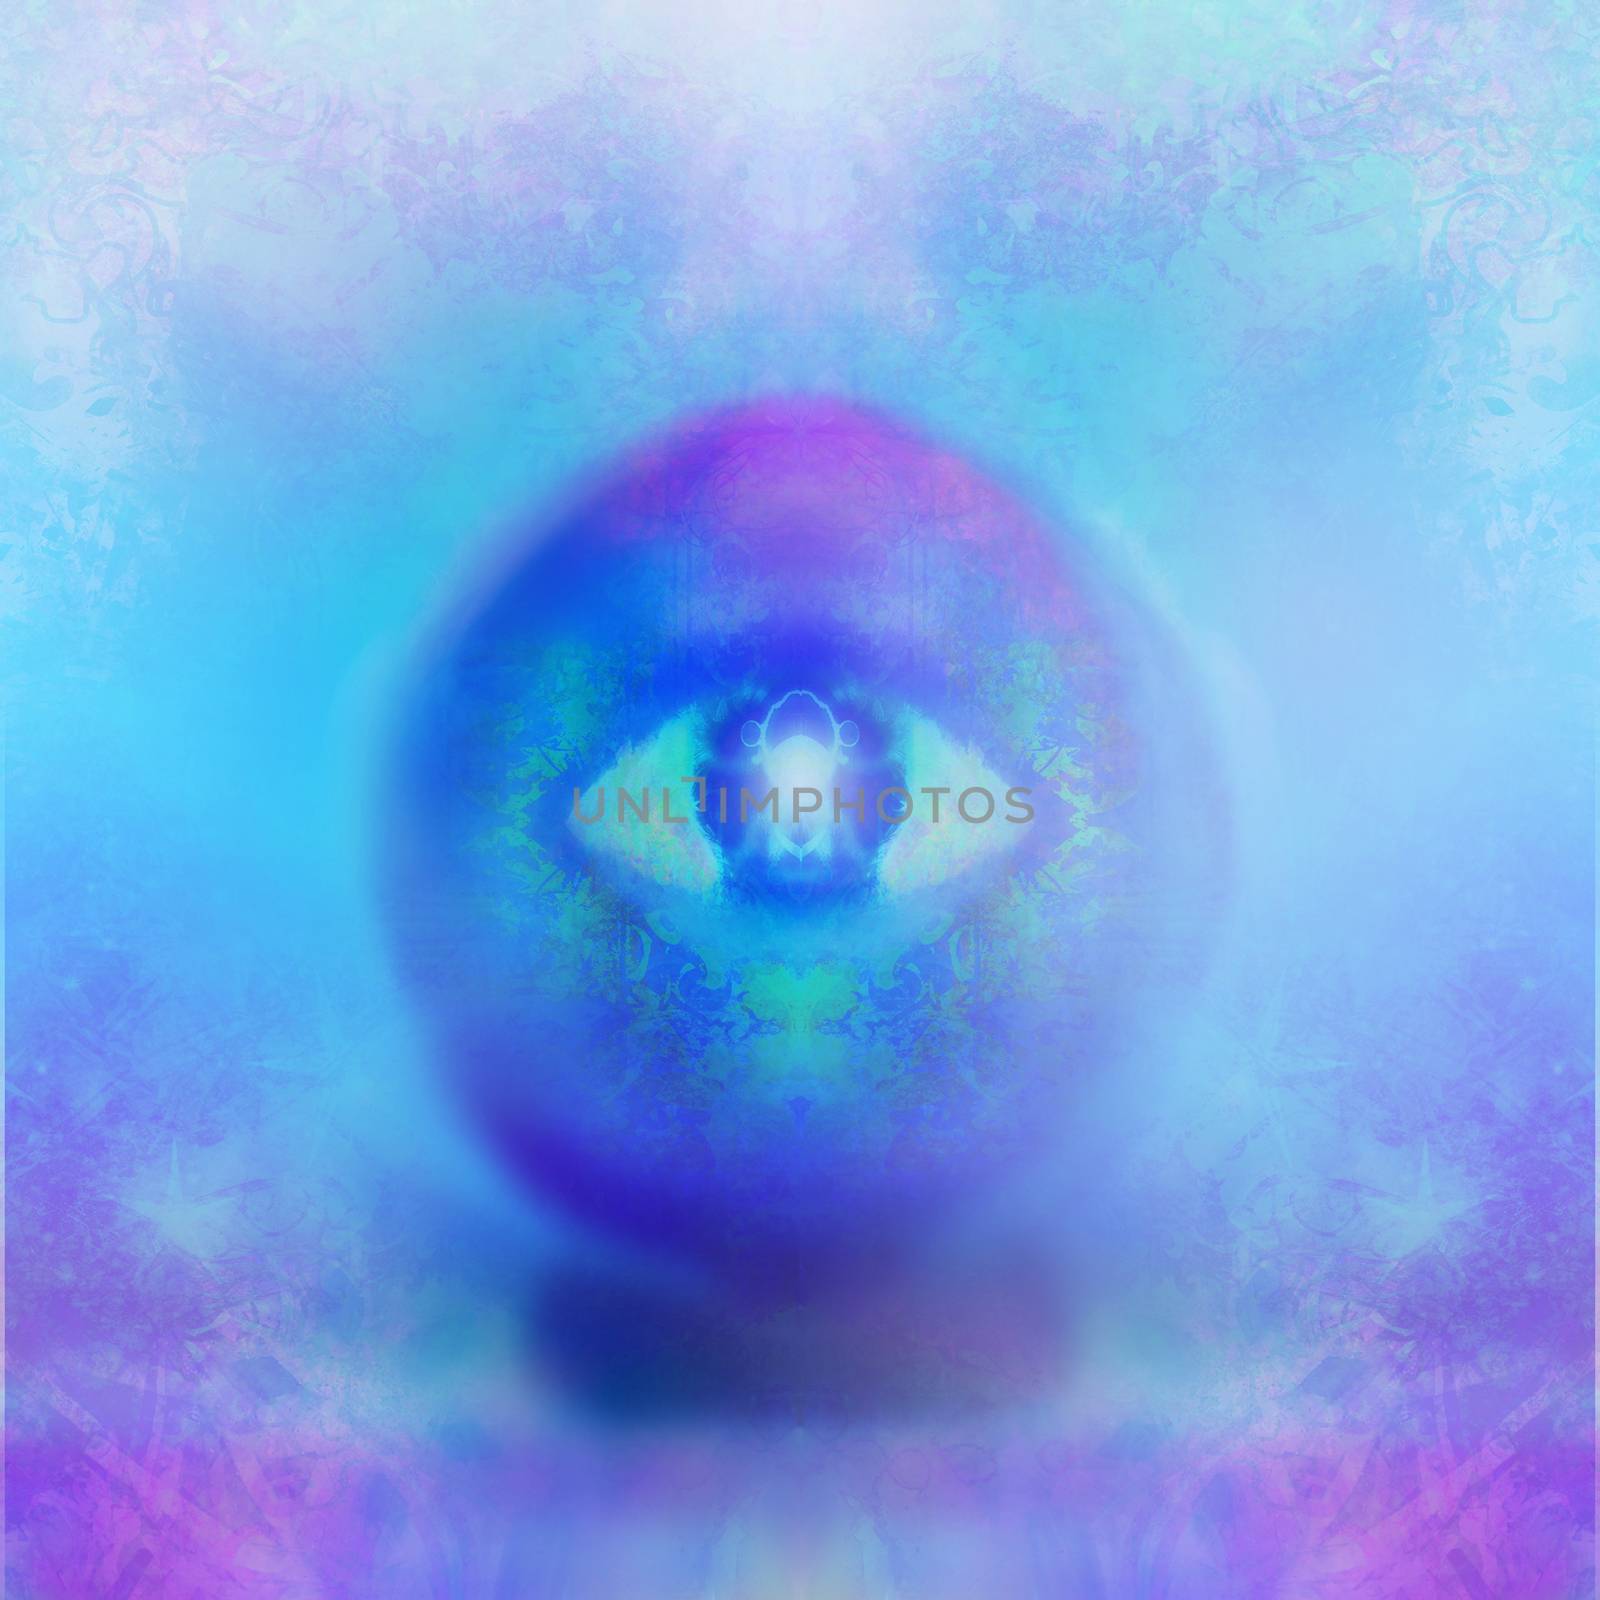 Fortune teller's Crystal Ball with eye